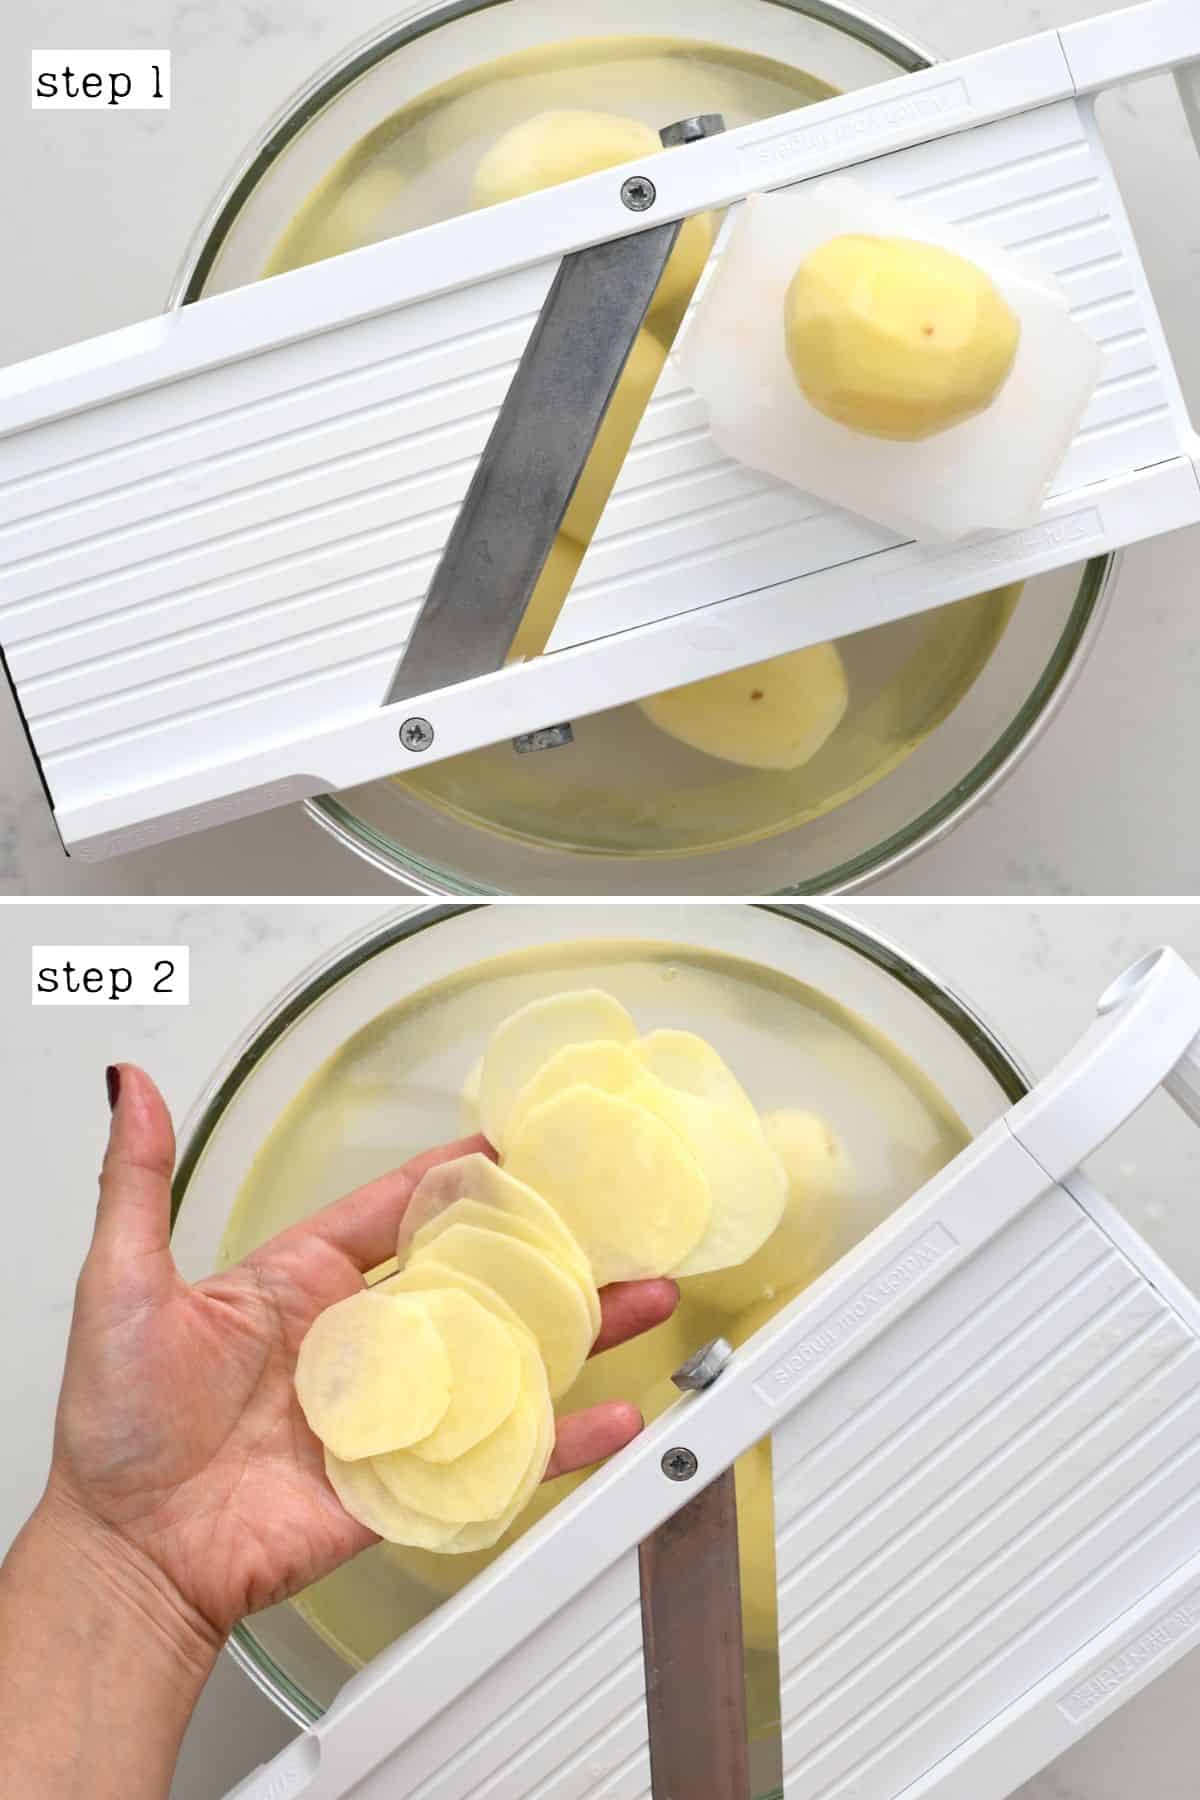 Steps for cutting potatoes